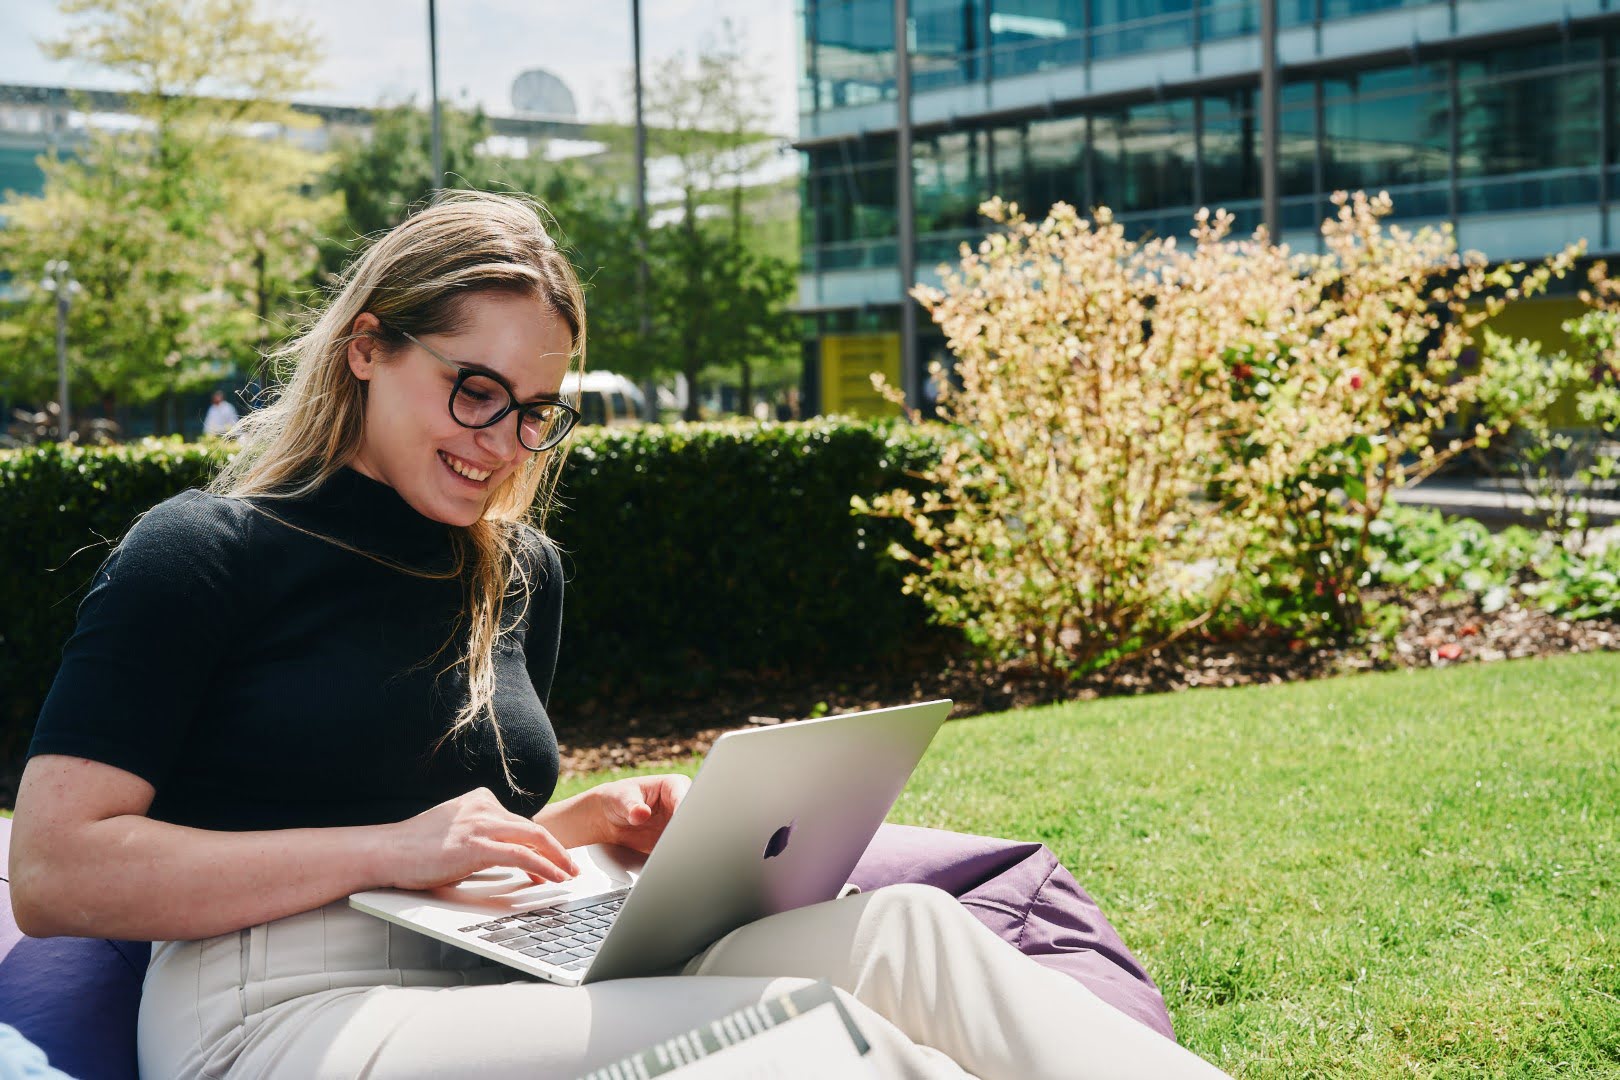 A person sits on the grass and uses a laptop.